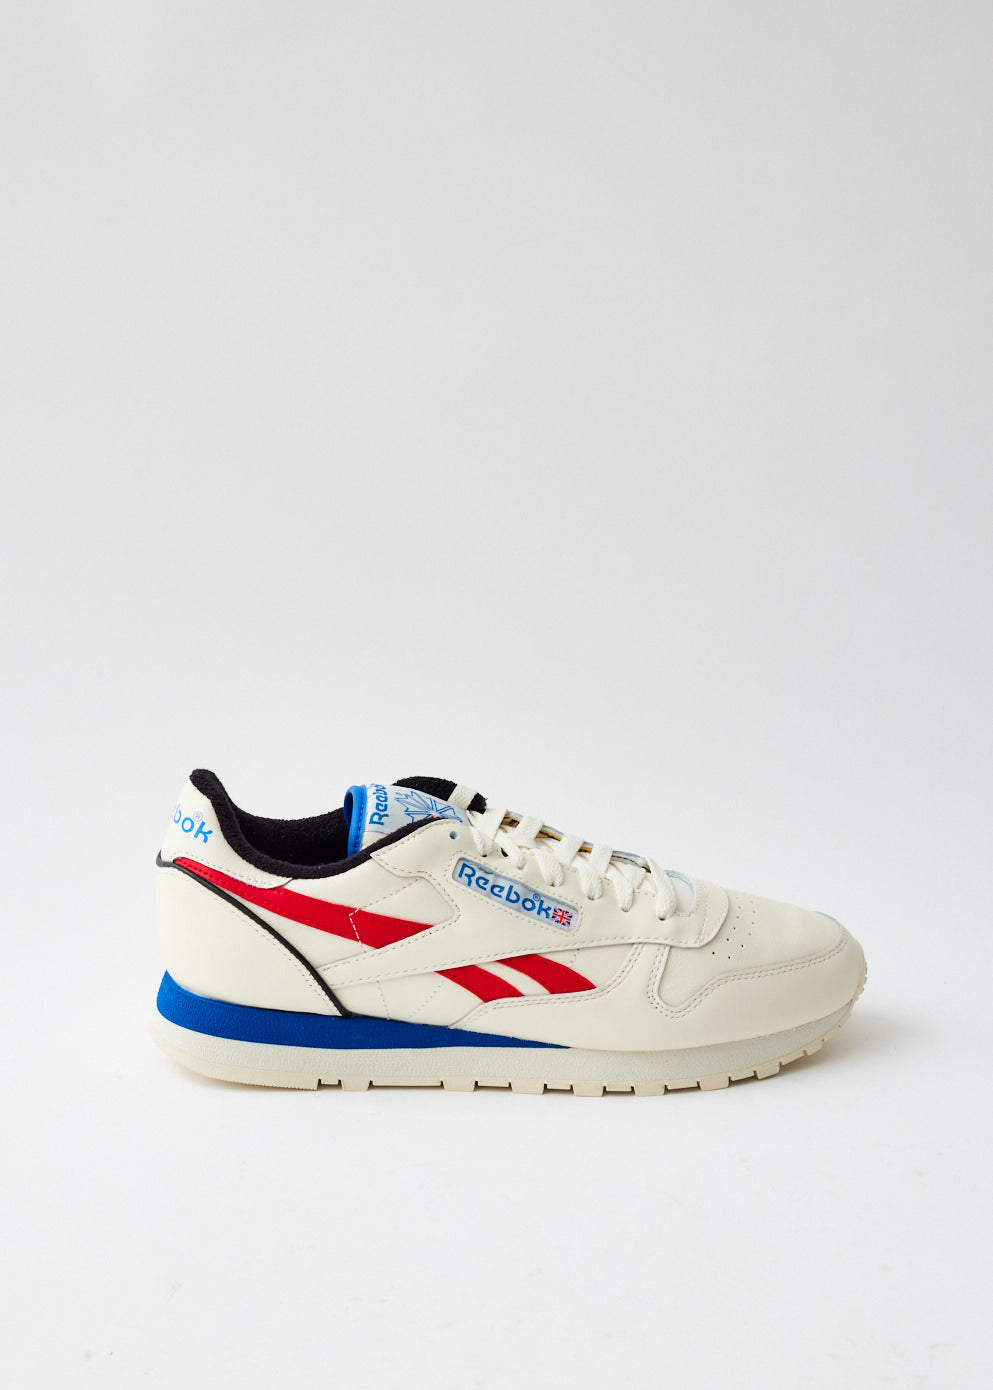 Classic Leather 1983 Vintage Sneakers